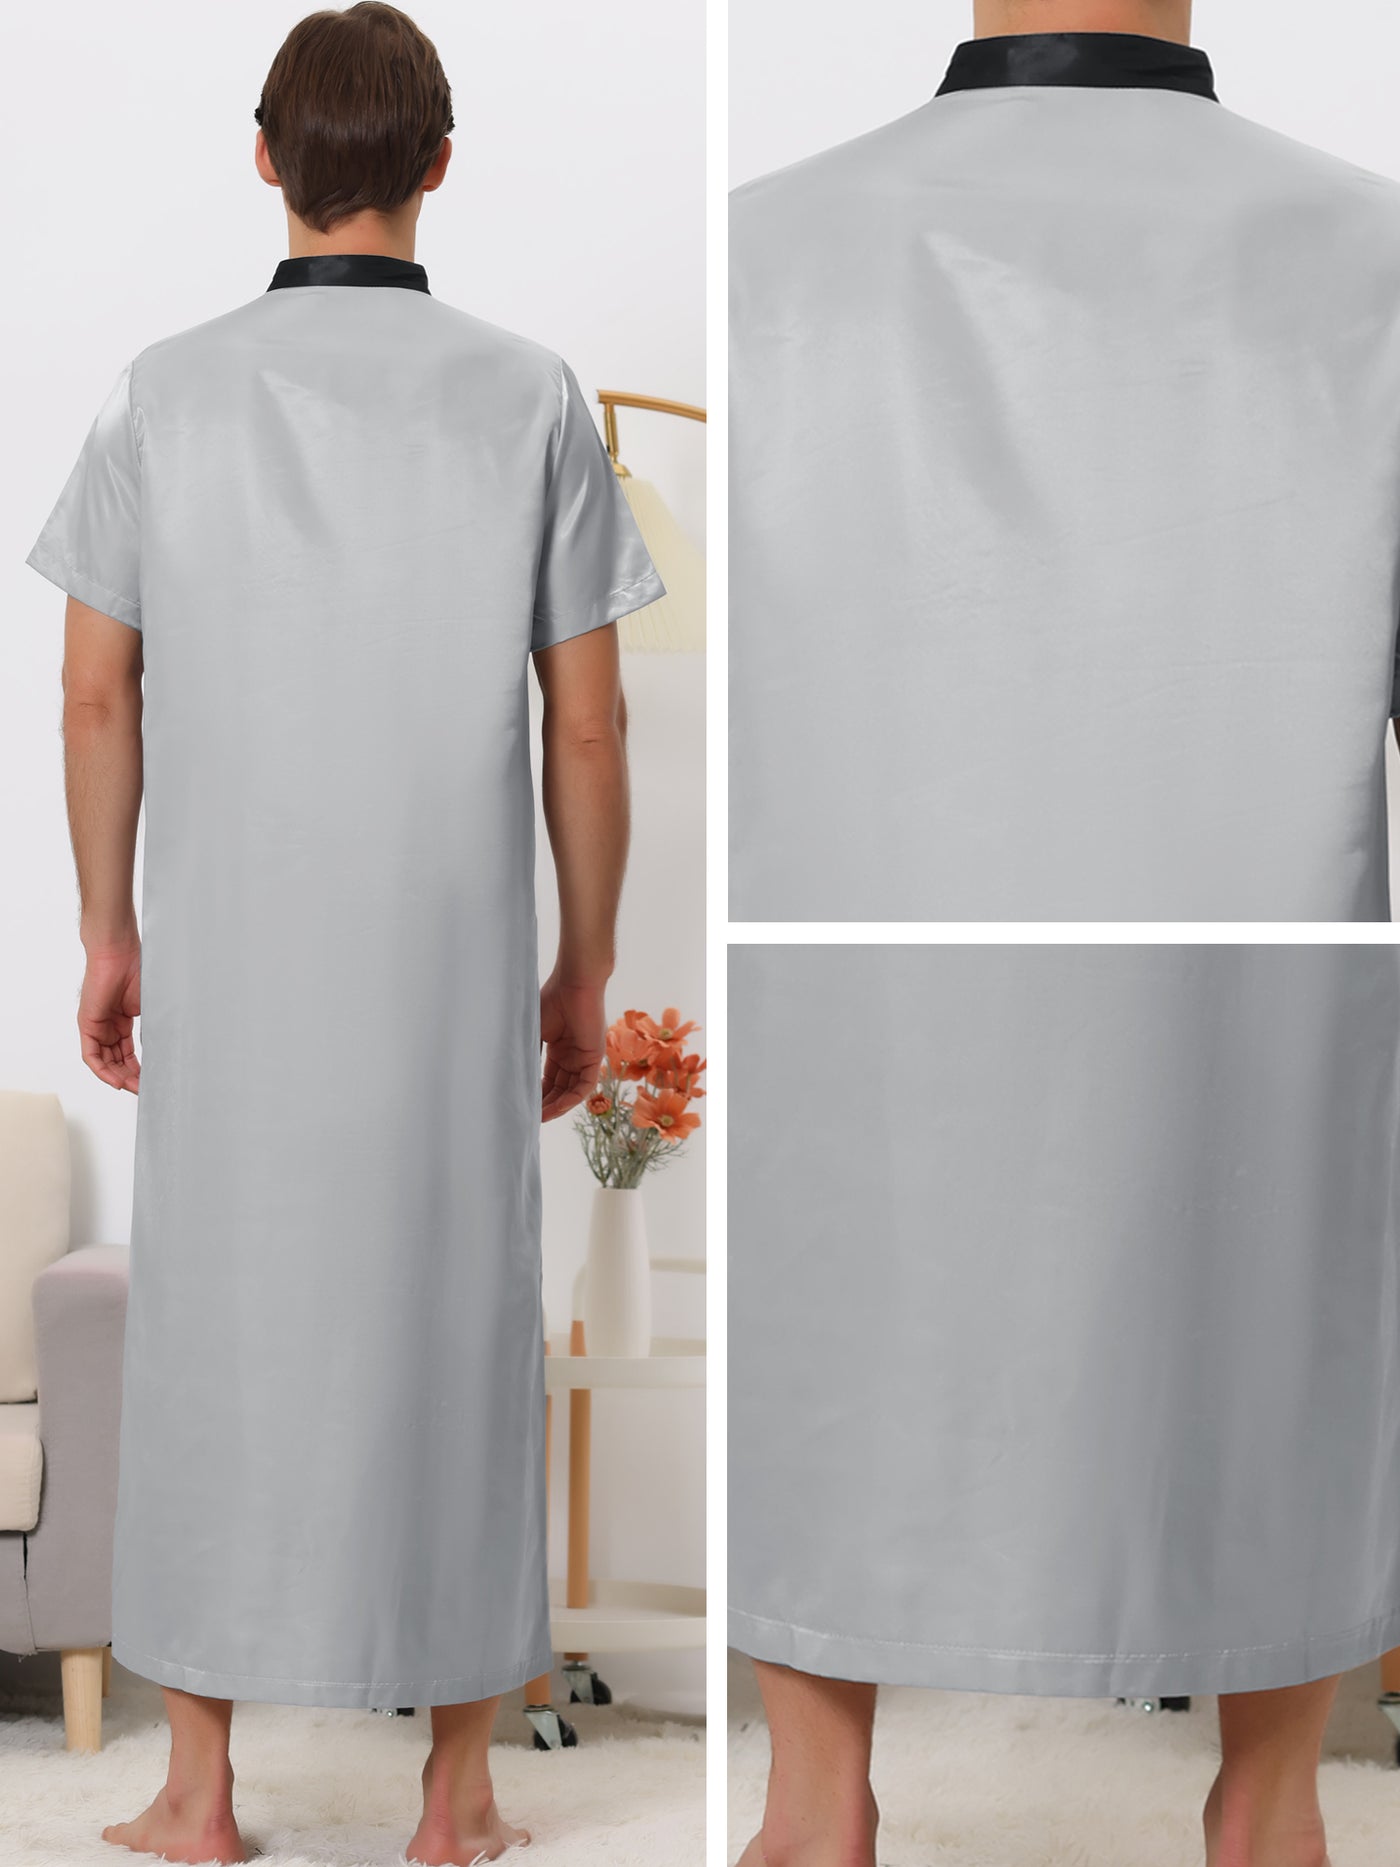 Bublédon Band Collar Nightshirt Short Sleeves Contrast Color Sleepwear Gown